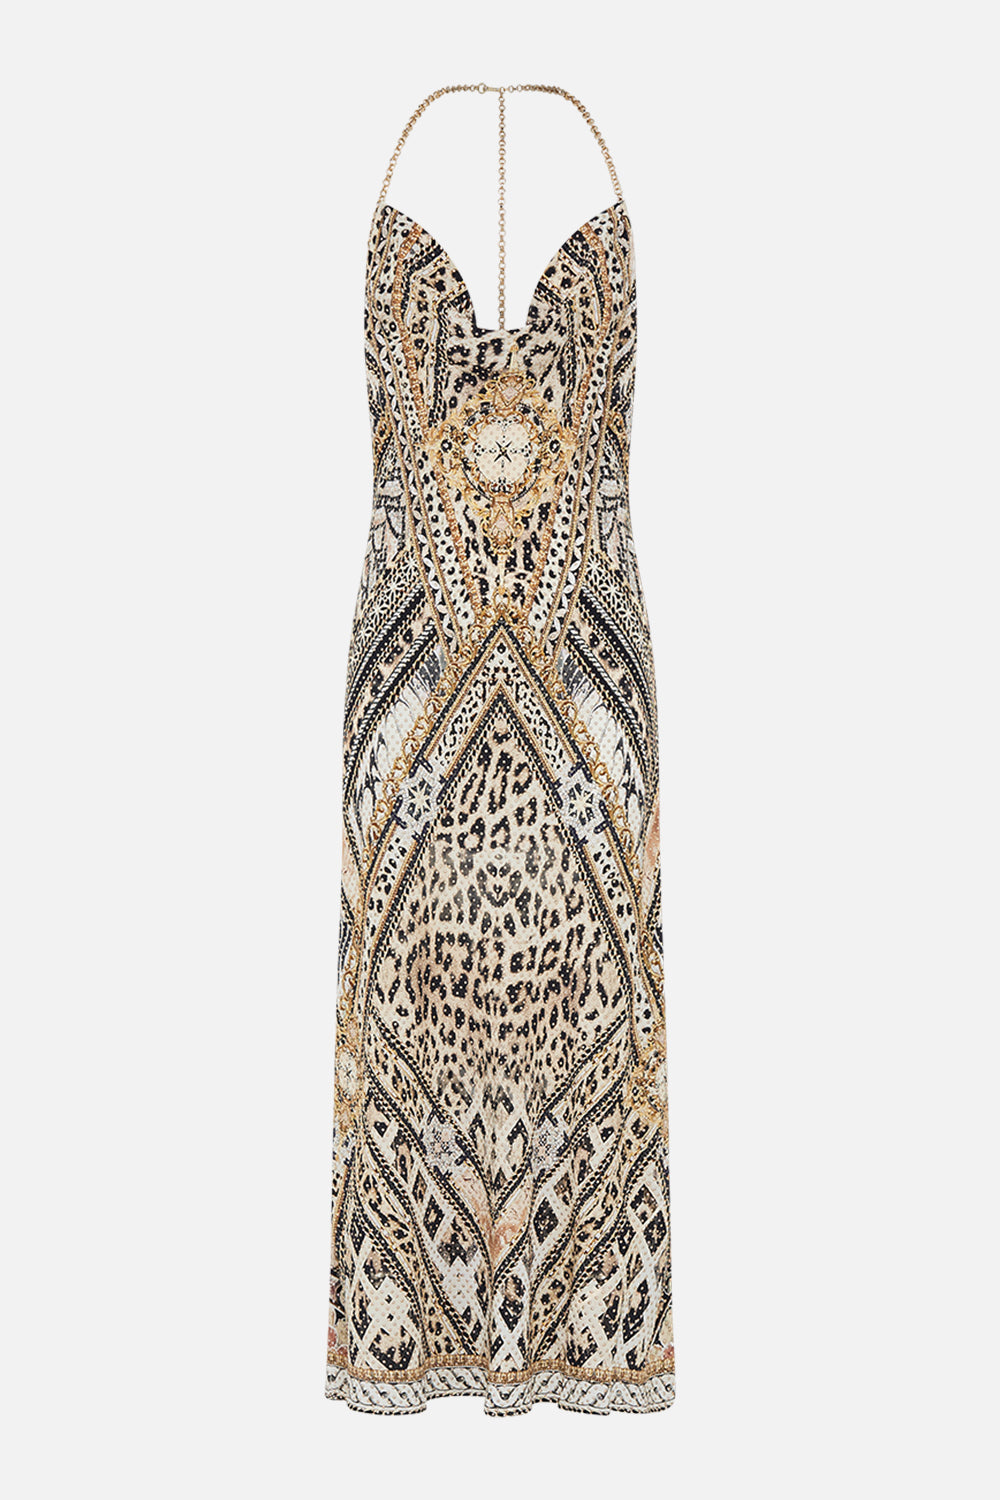 Product view of CAMILLA bias silk dress in Mosaic Muse print